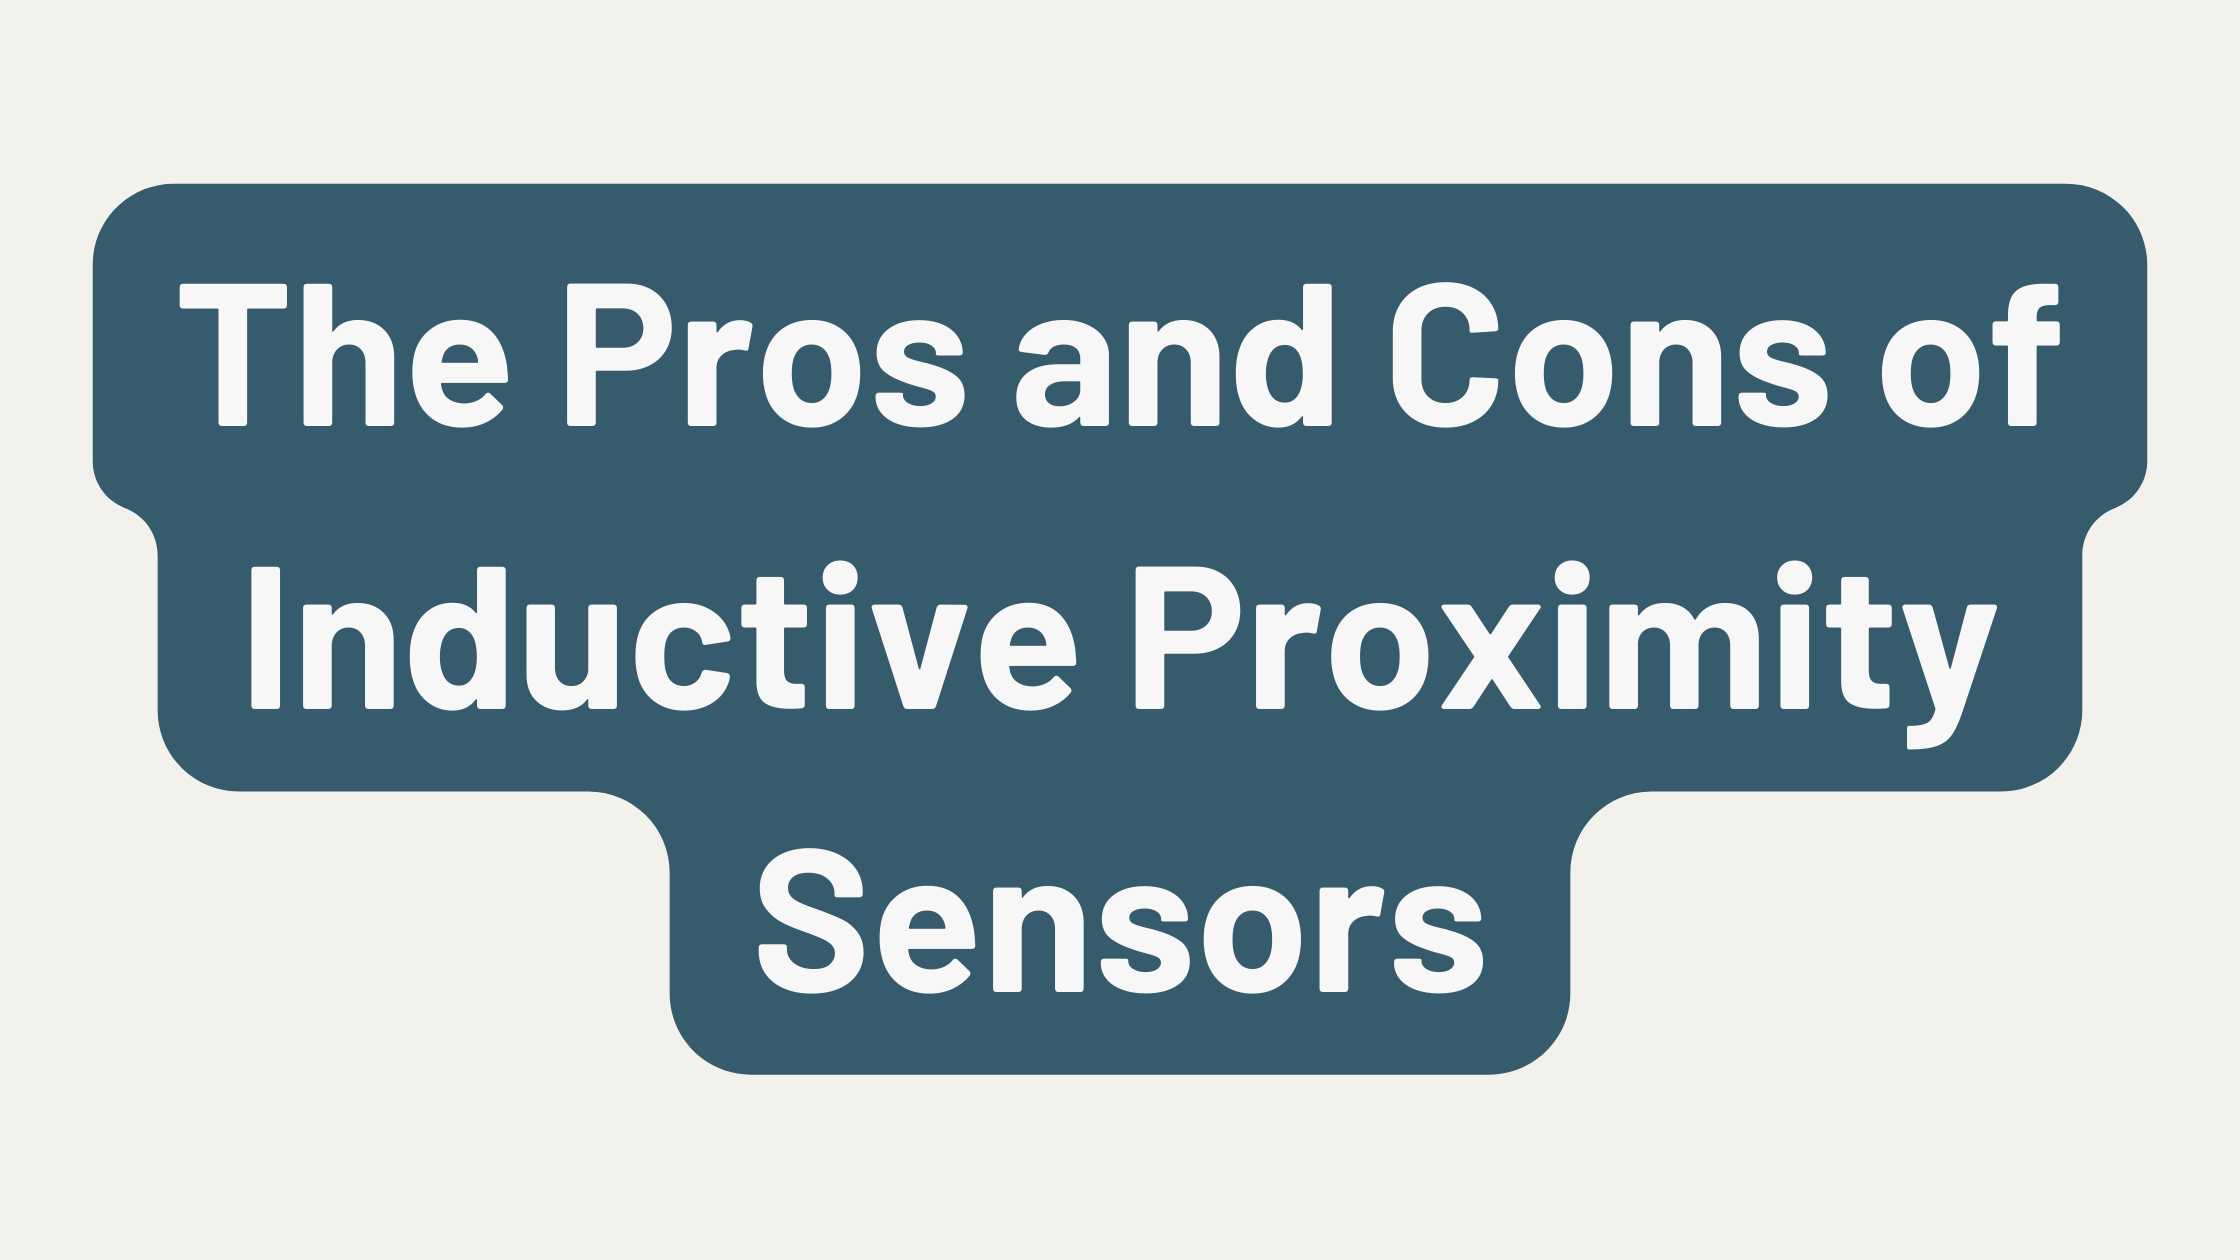 The Pros and Cons of Inductive Proximity Sensors